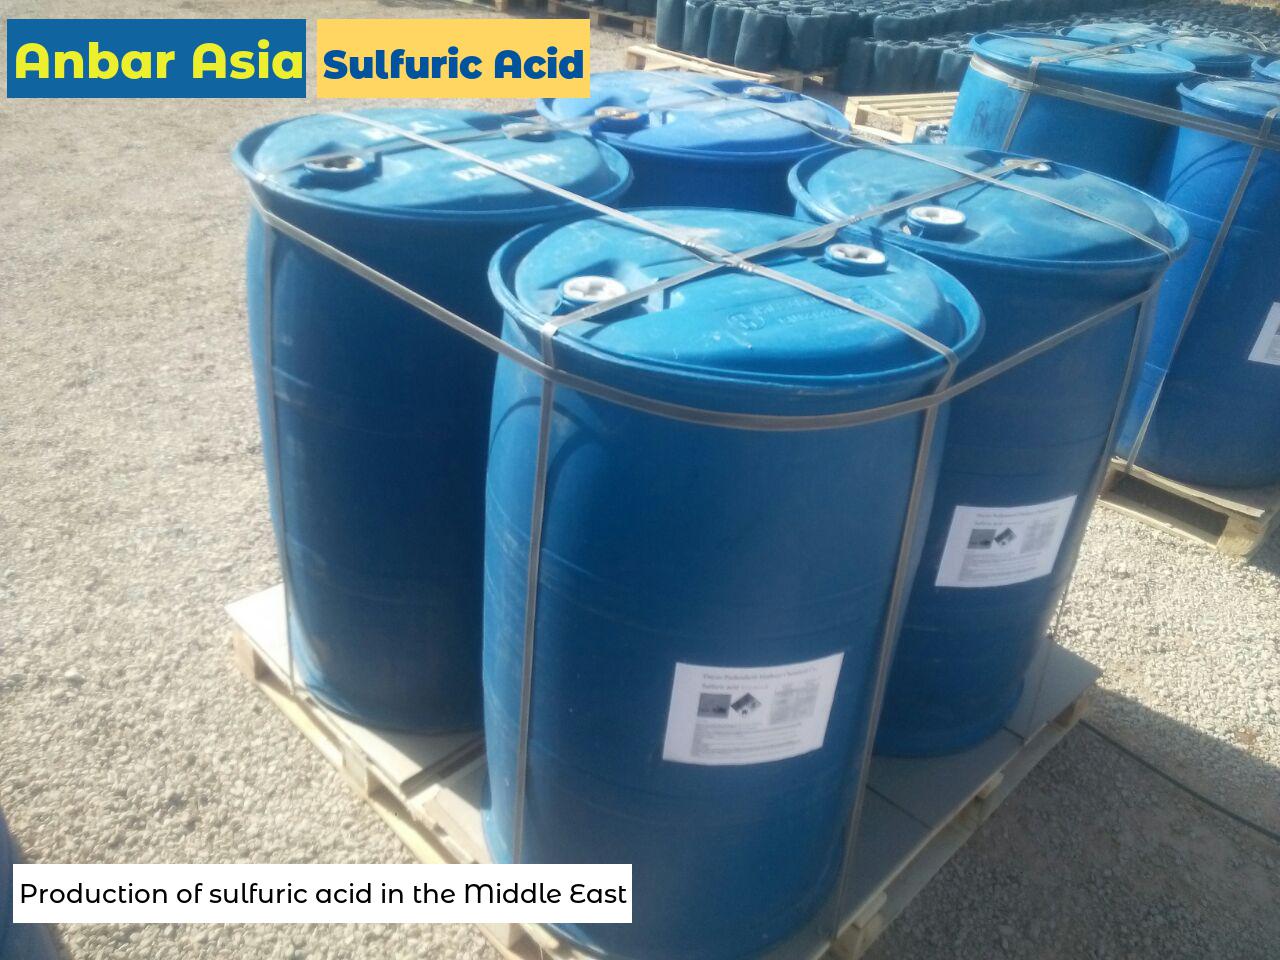 Production of sulfuric acid in the Middle East